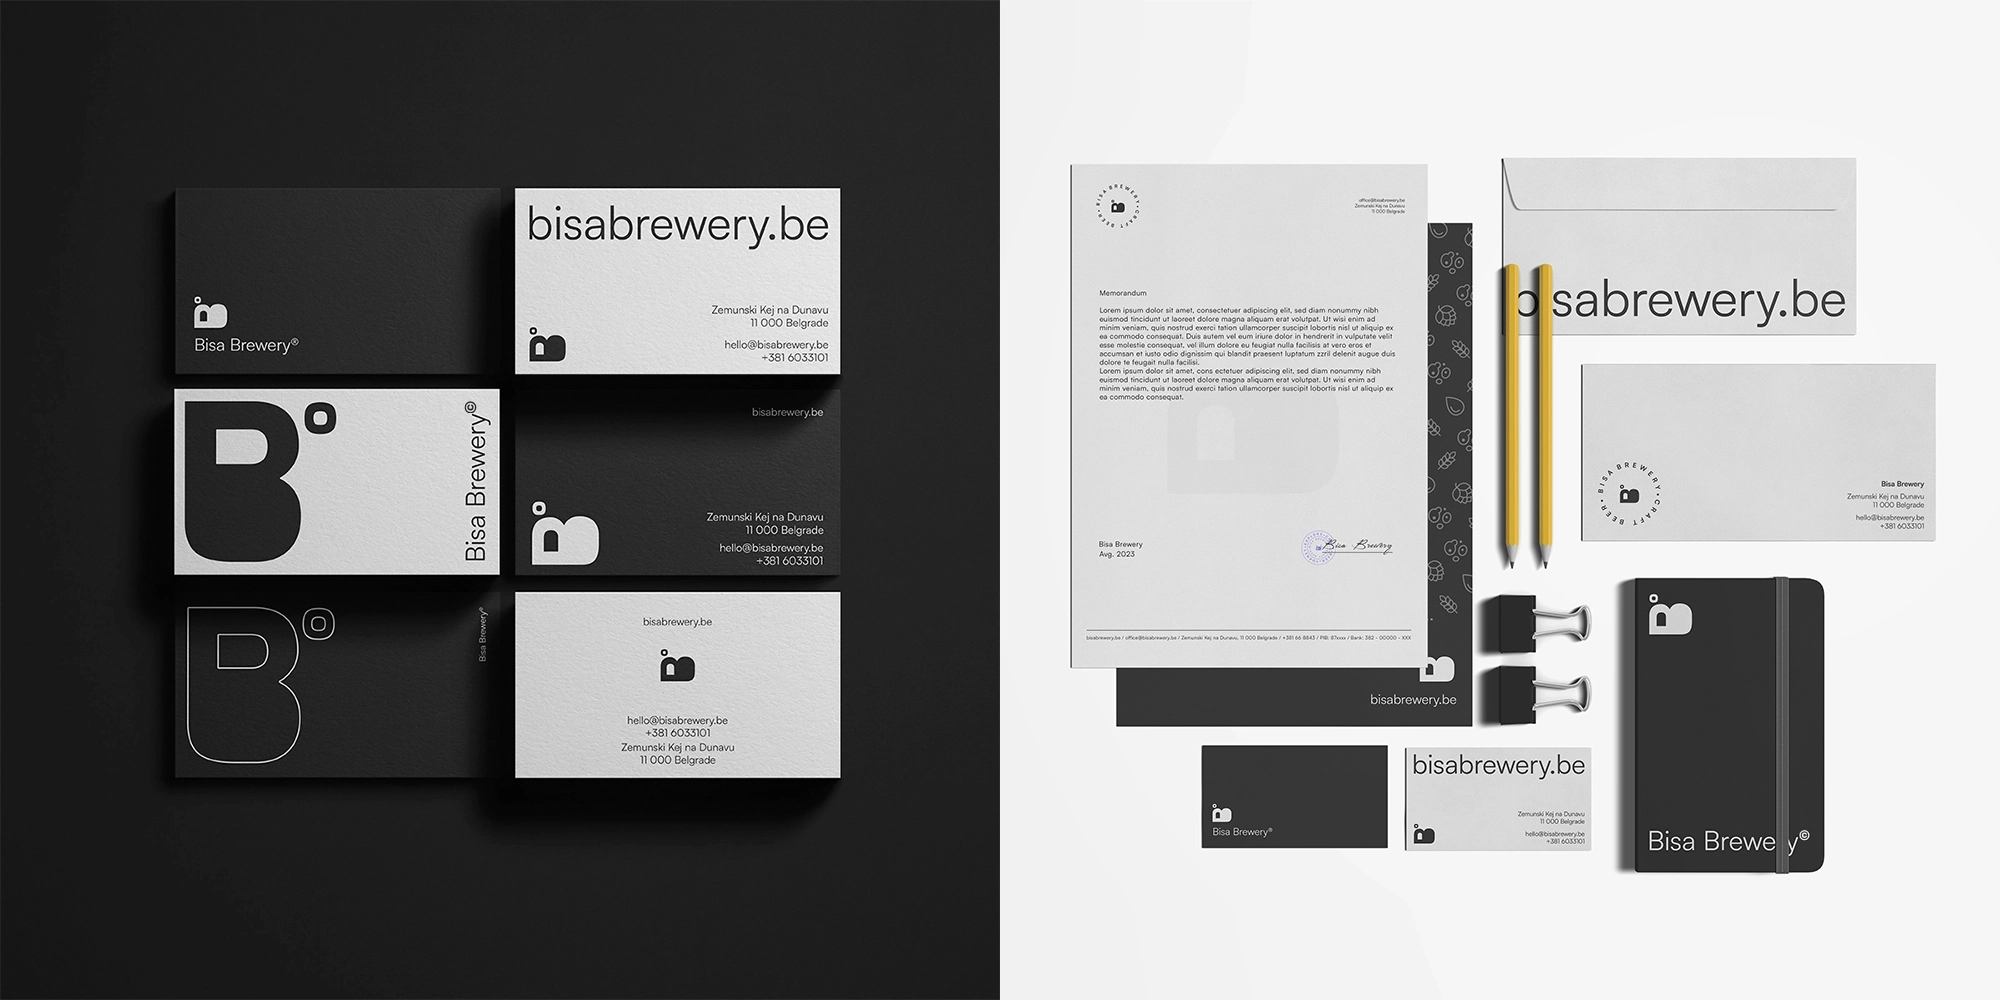 Bisa Brewery - Business Cards and Stationery design - Created by Milena Stanisavljevic, Web and Graphic Designer at miletart.com